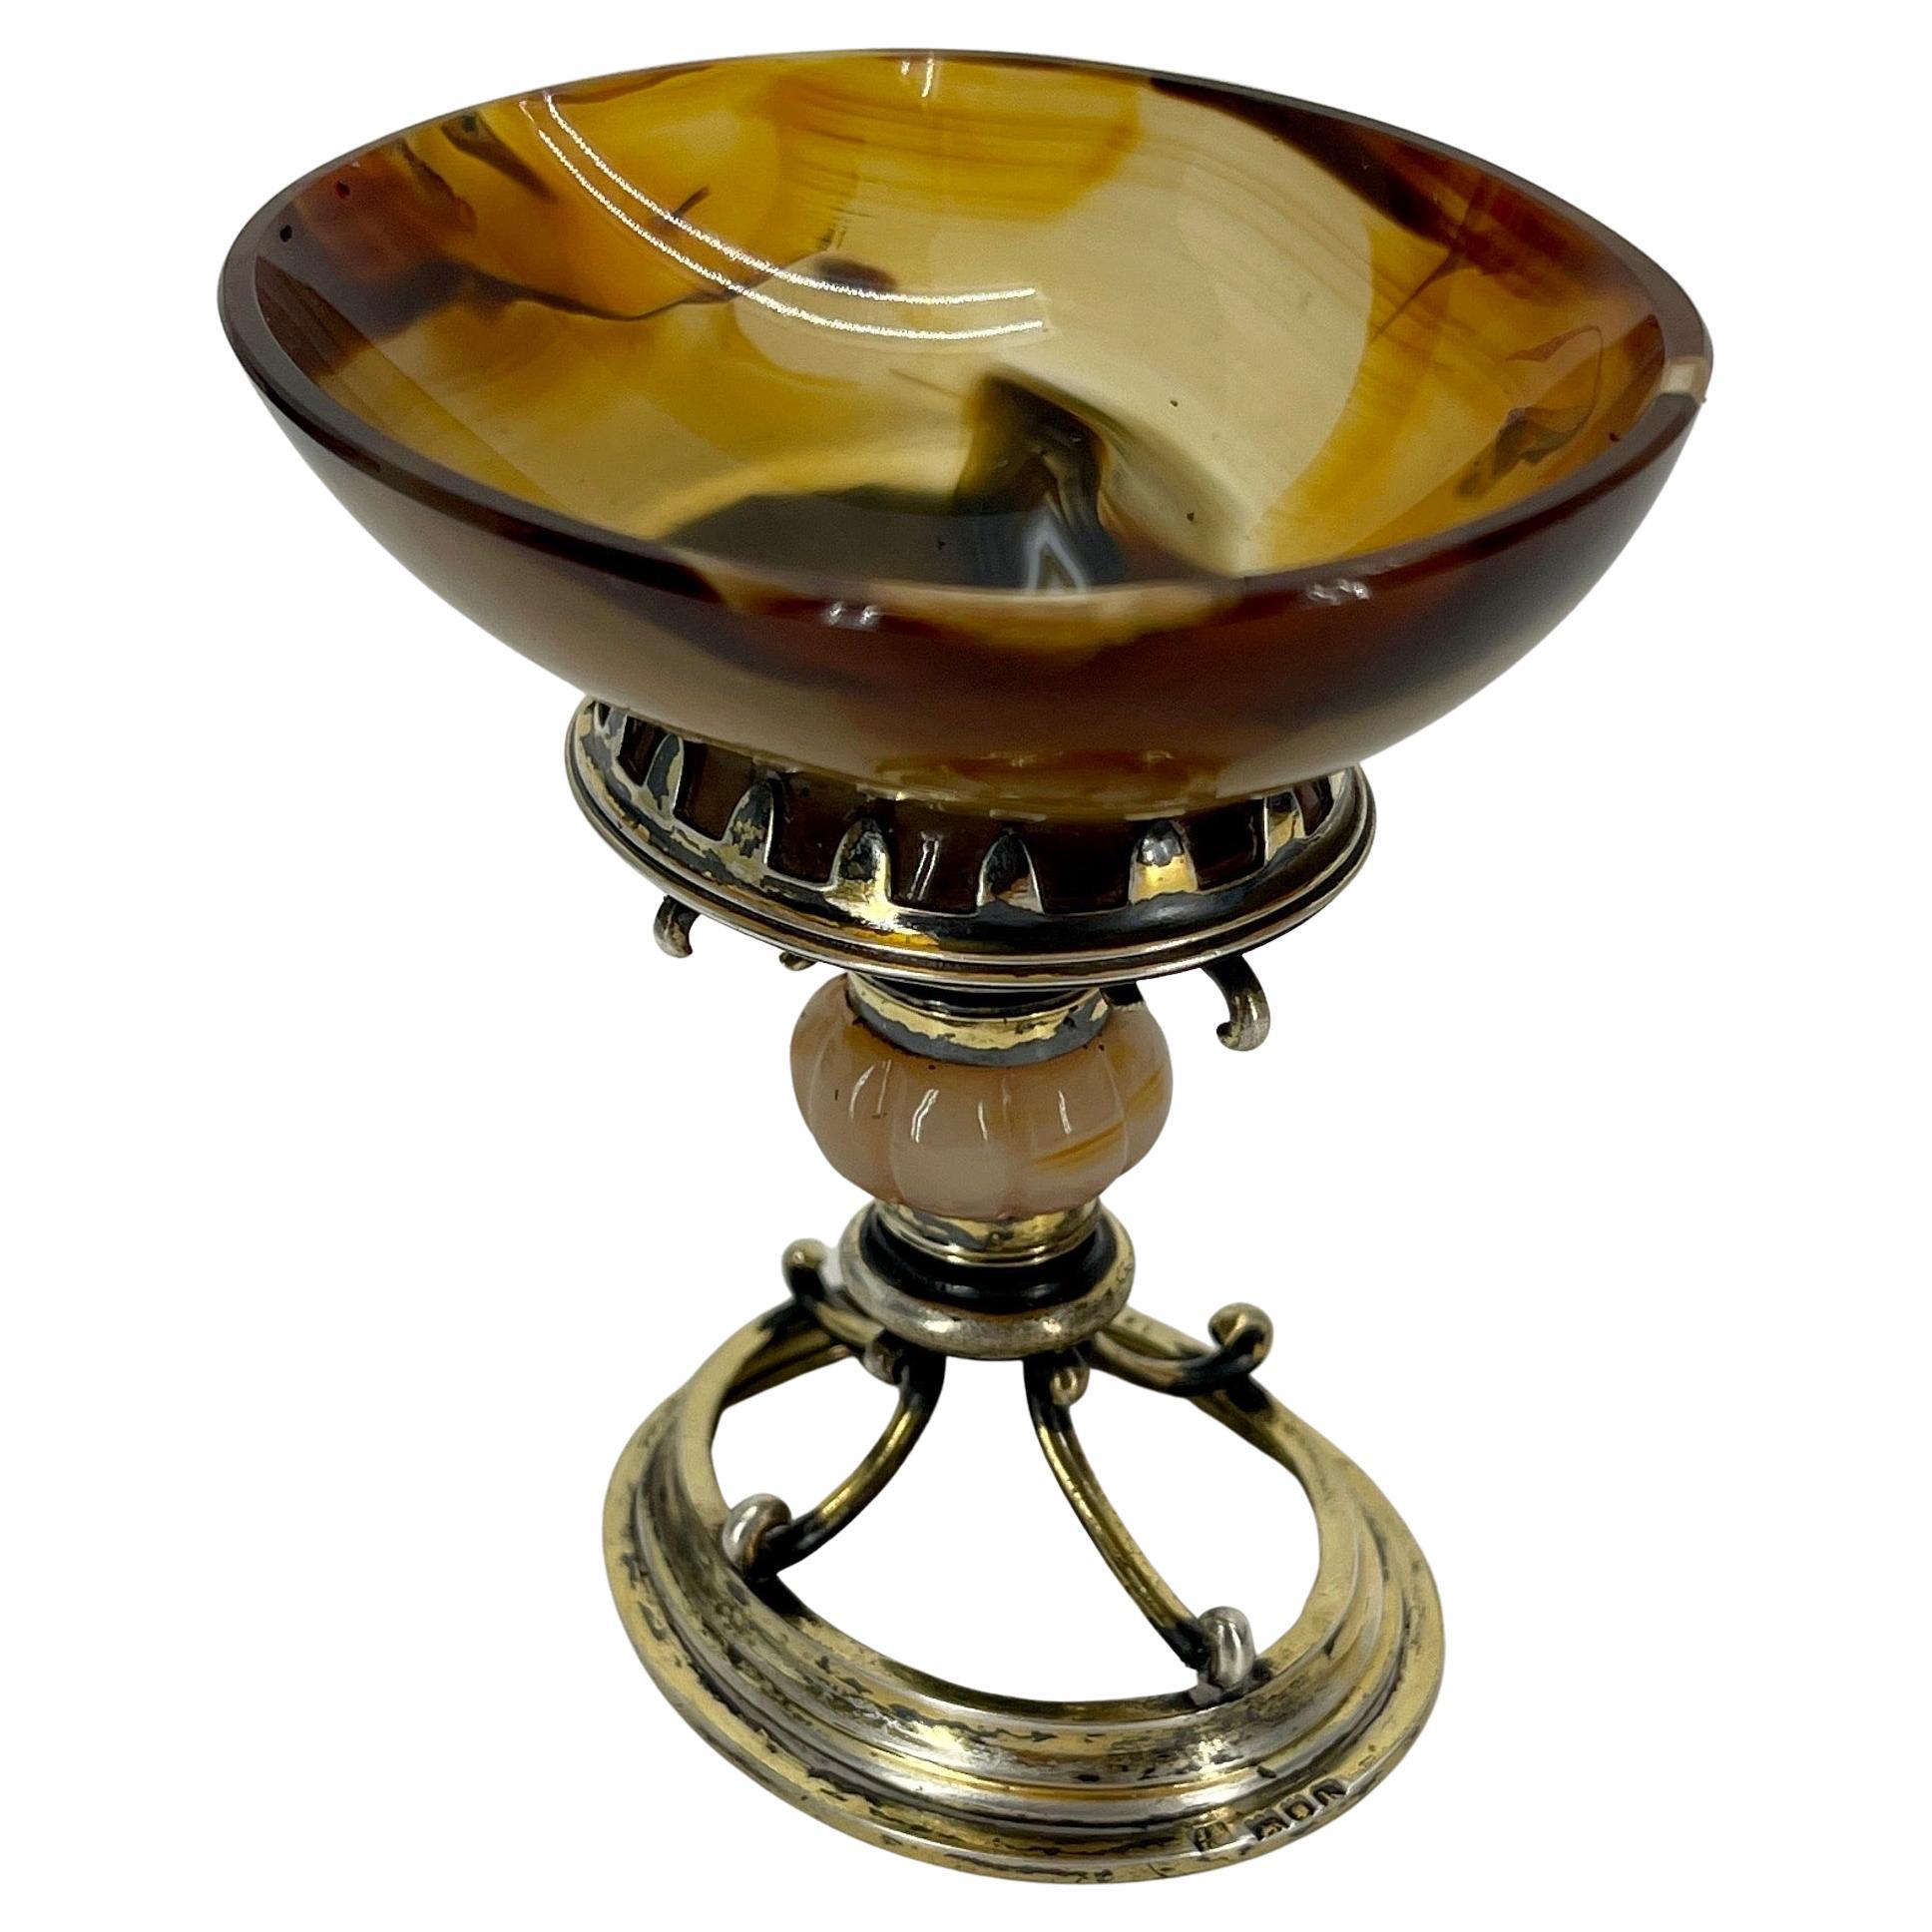 Early English Agate and Gilt Sterling Silver Jar Bowl or Salt Cellar In Good Condition For Sale In Haddonfield, NJ